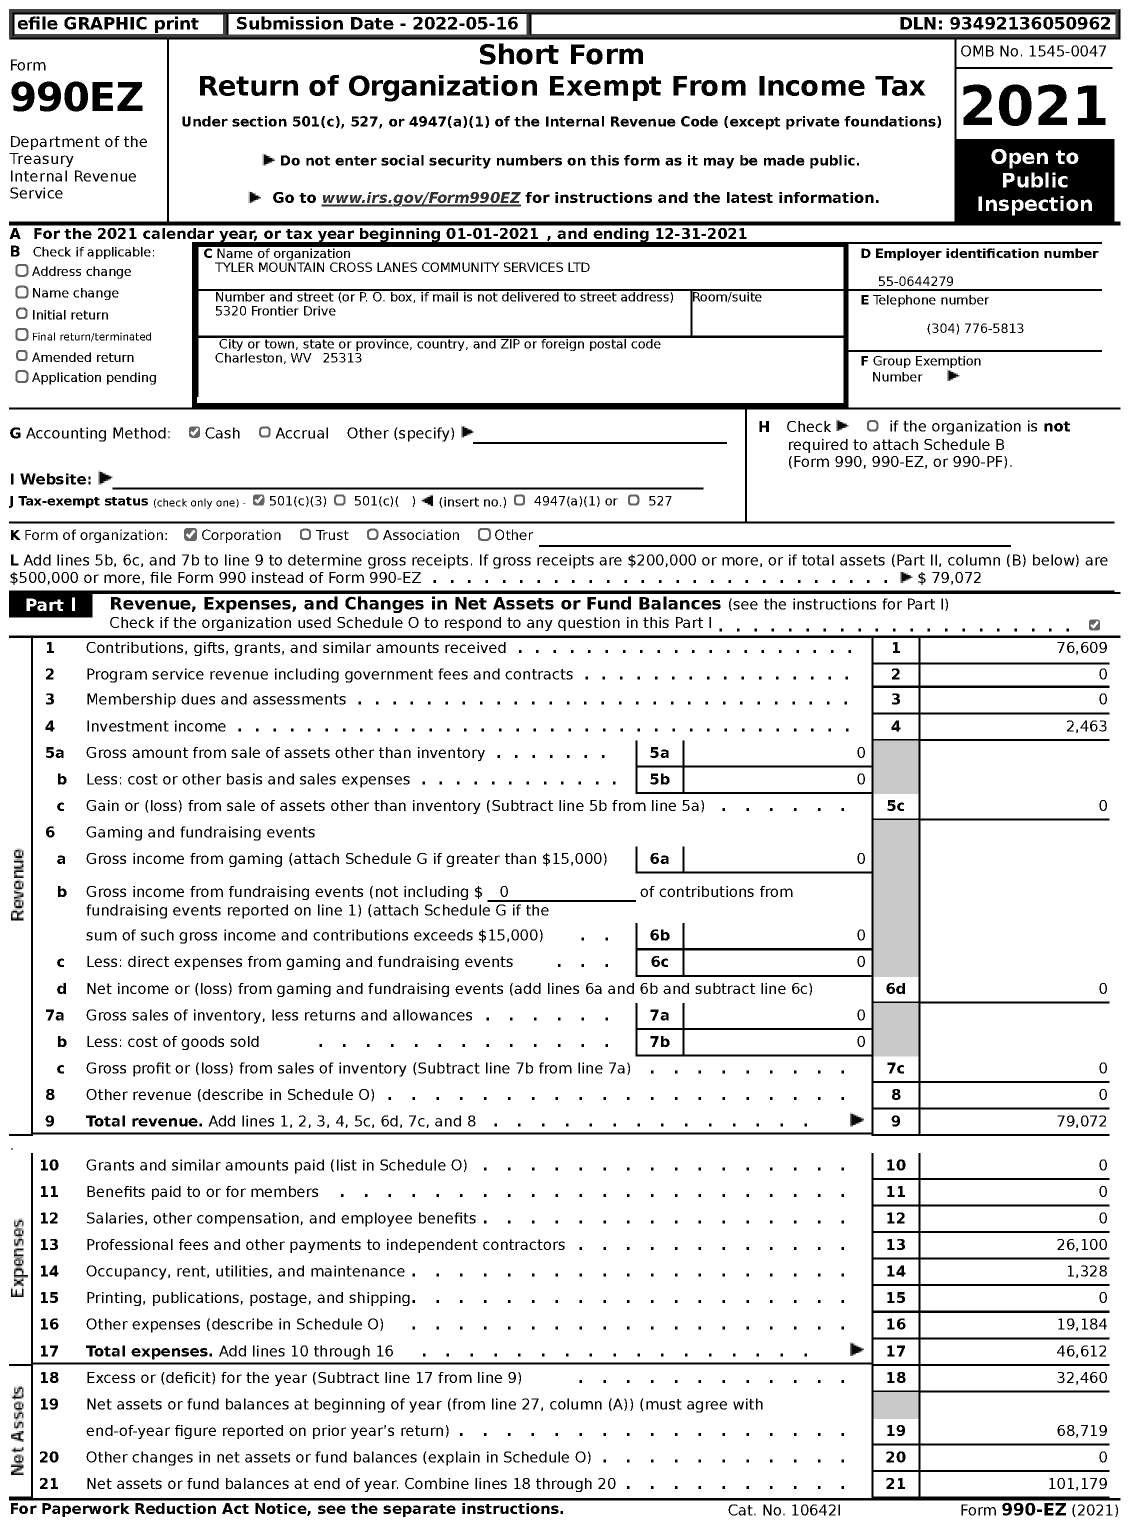 Image of first page of 2021 Form 990EZ for Tyler Mountain Cross Lanes Community Services